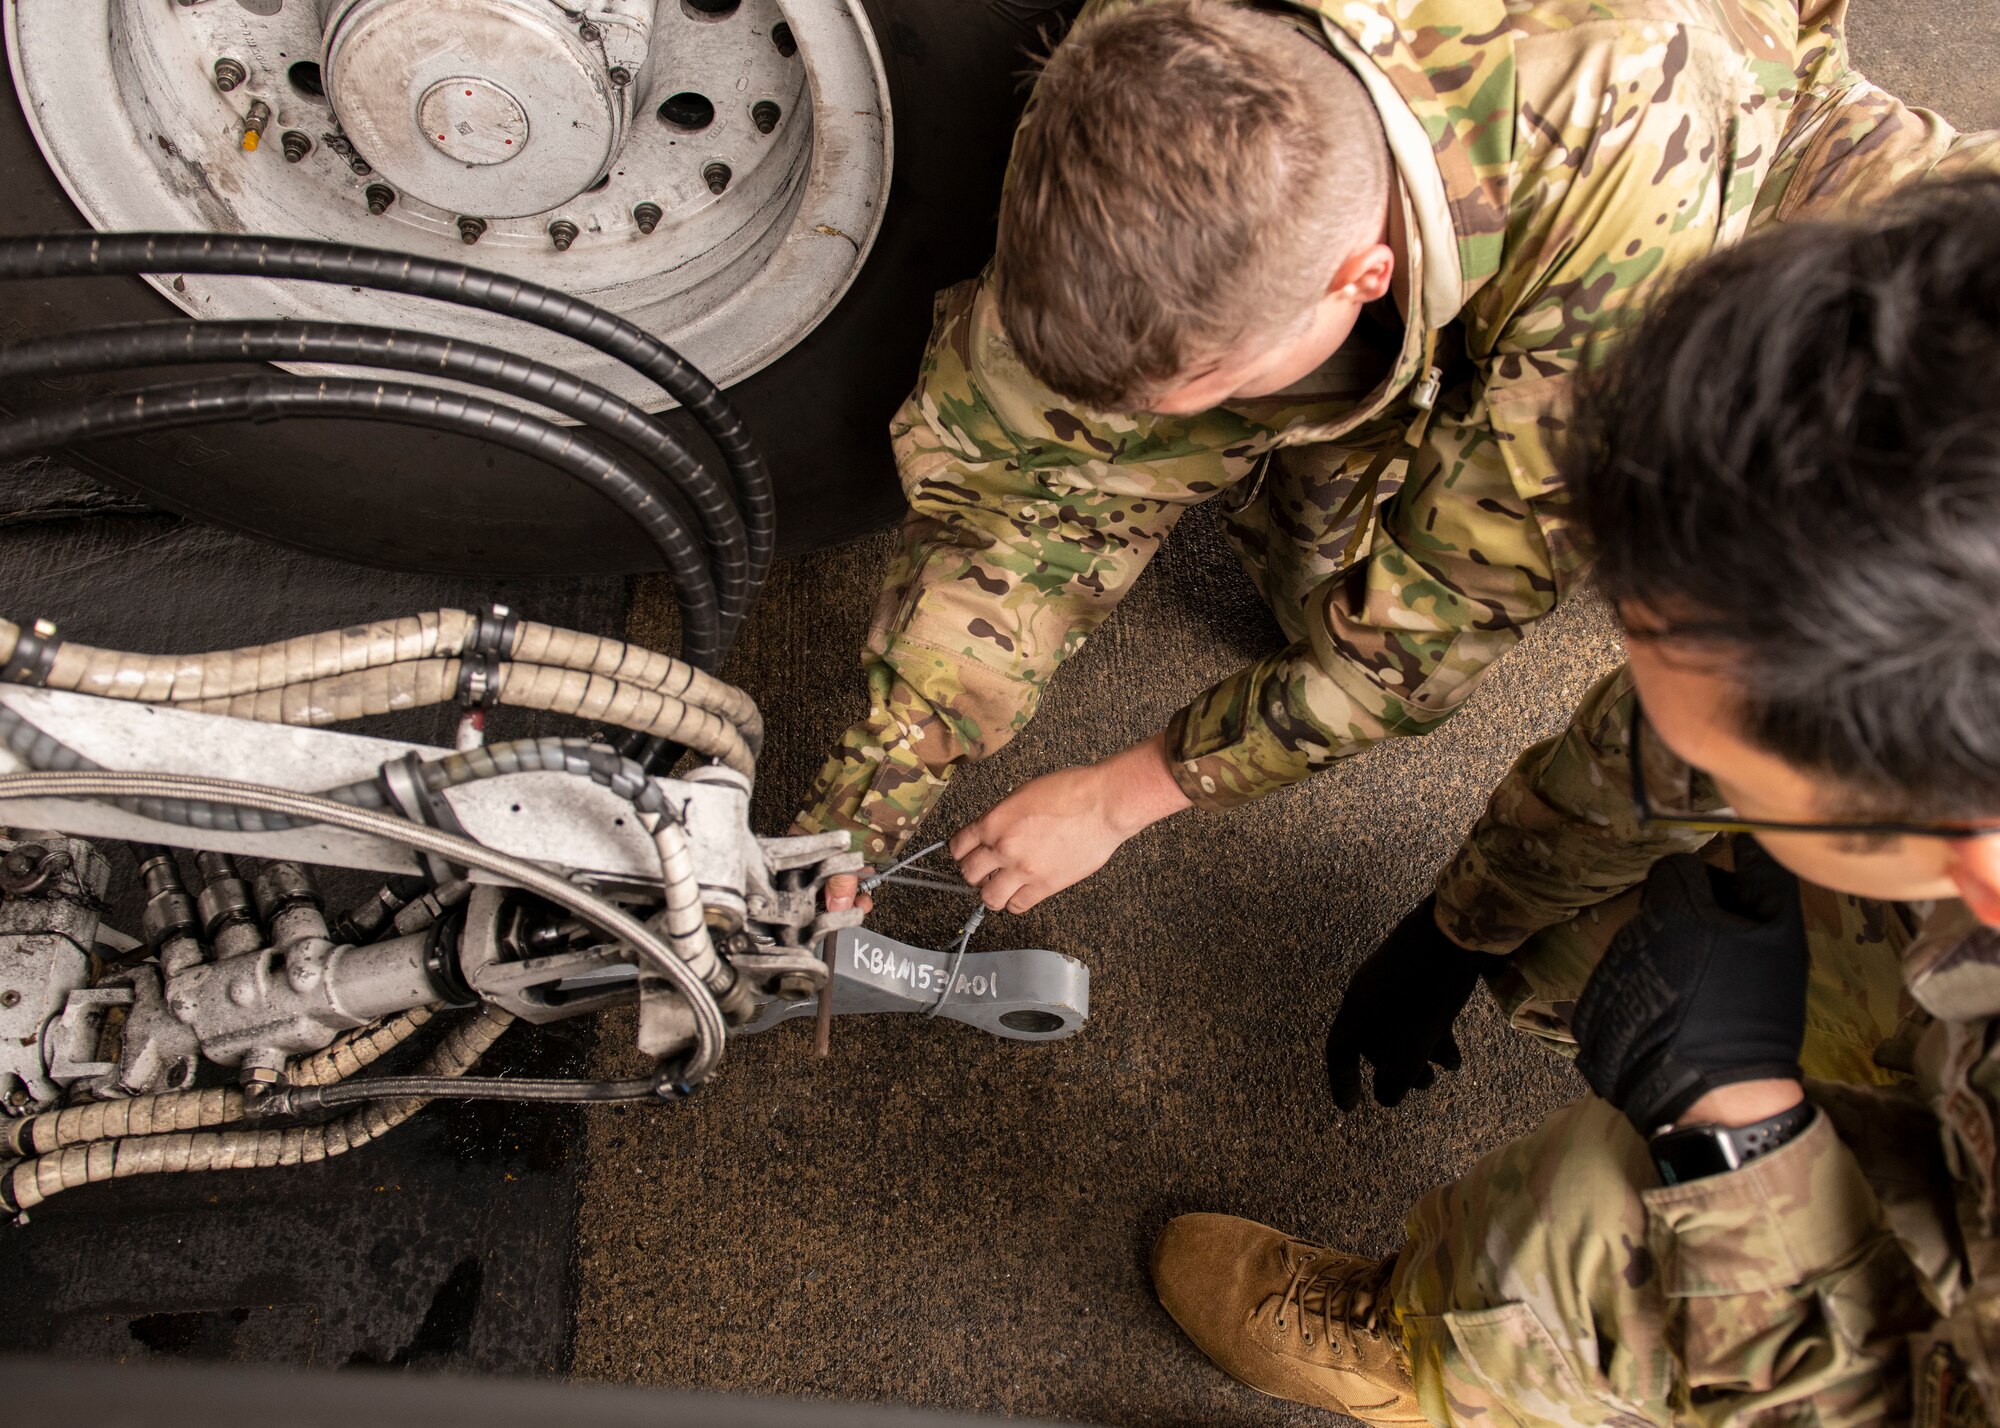 A top-down view of two airmen attaching a tow bar to an airplane's landing gear